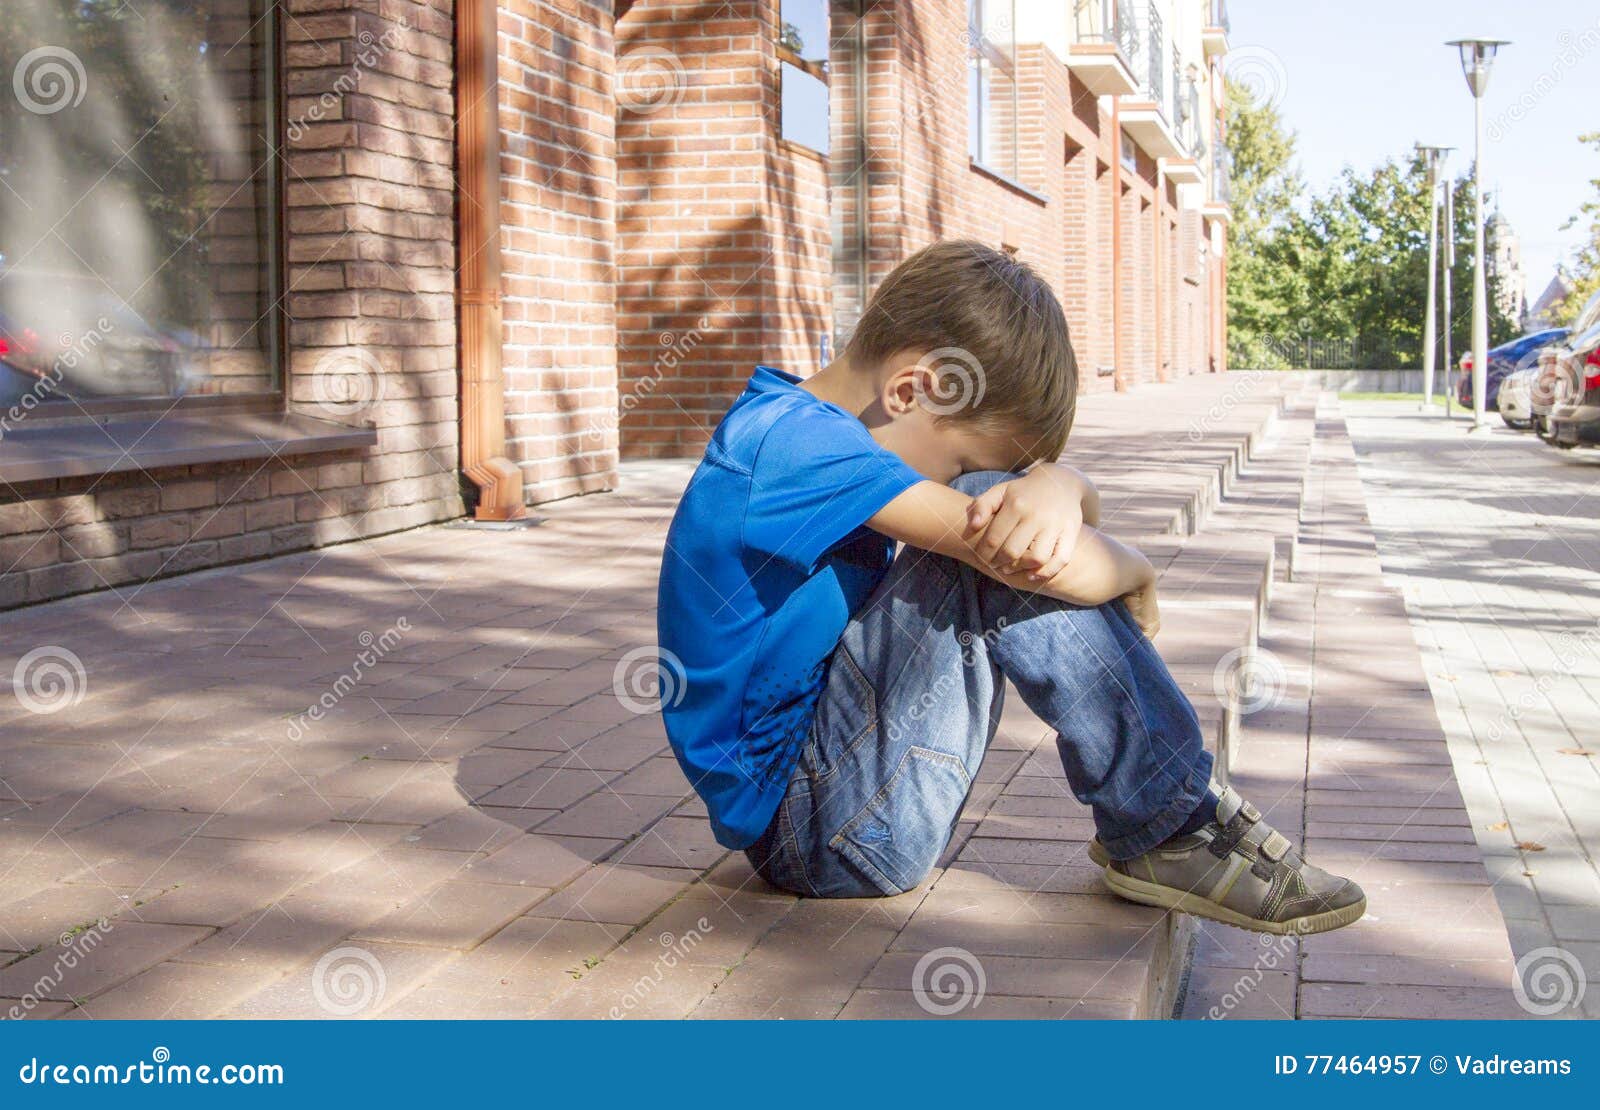 Sad, Lonely, Unhappy, Disappointed Child Sitting Alone on the ...